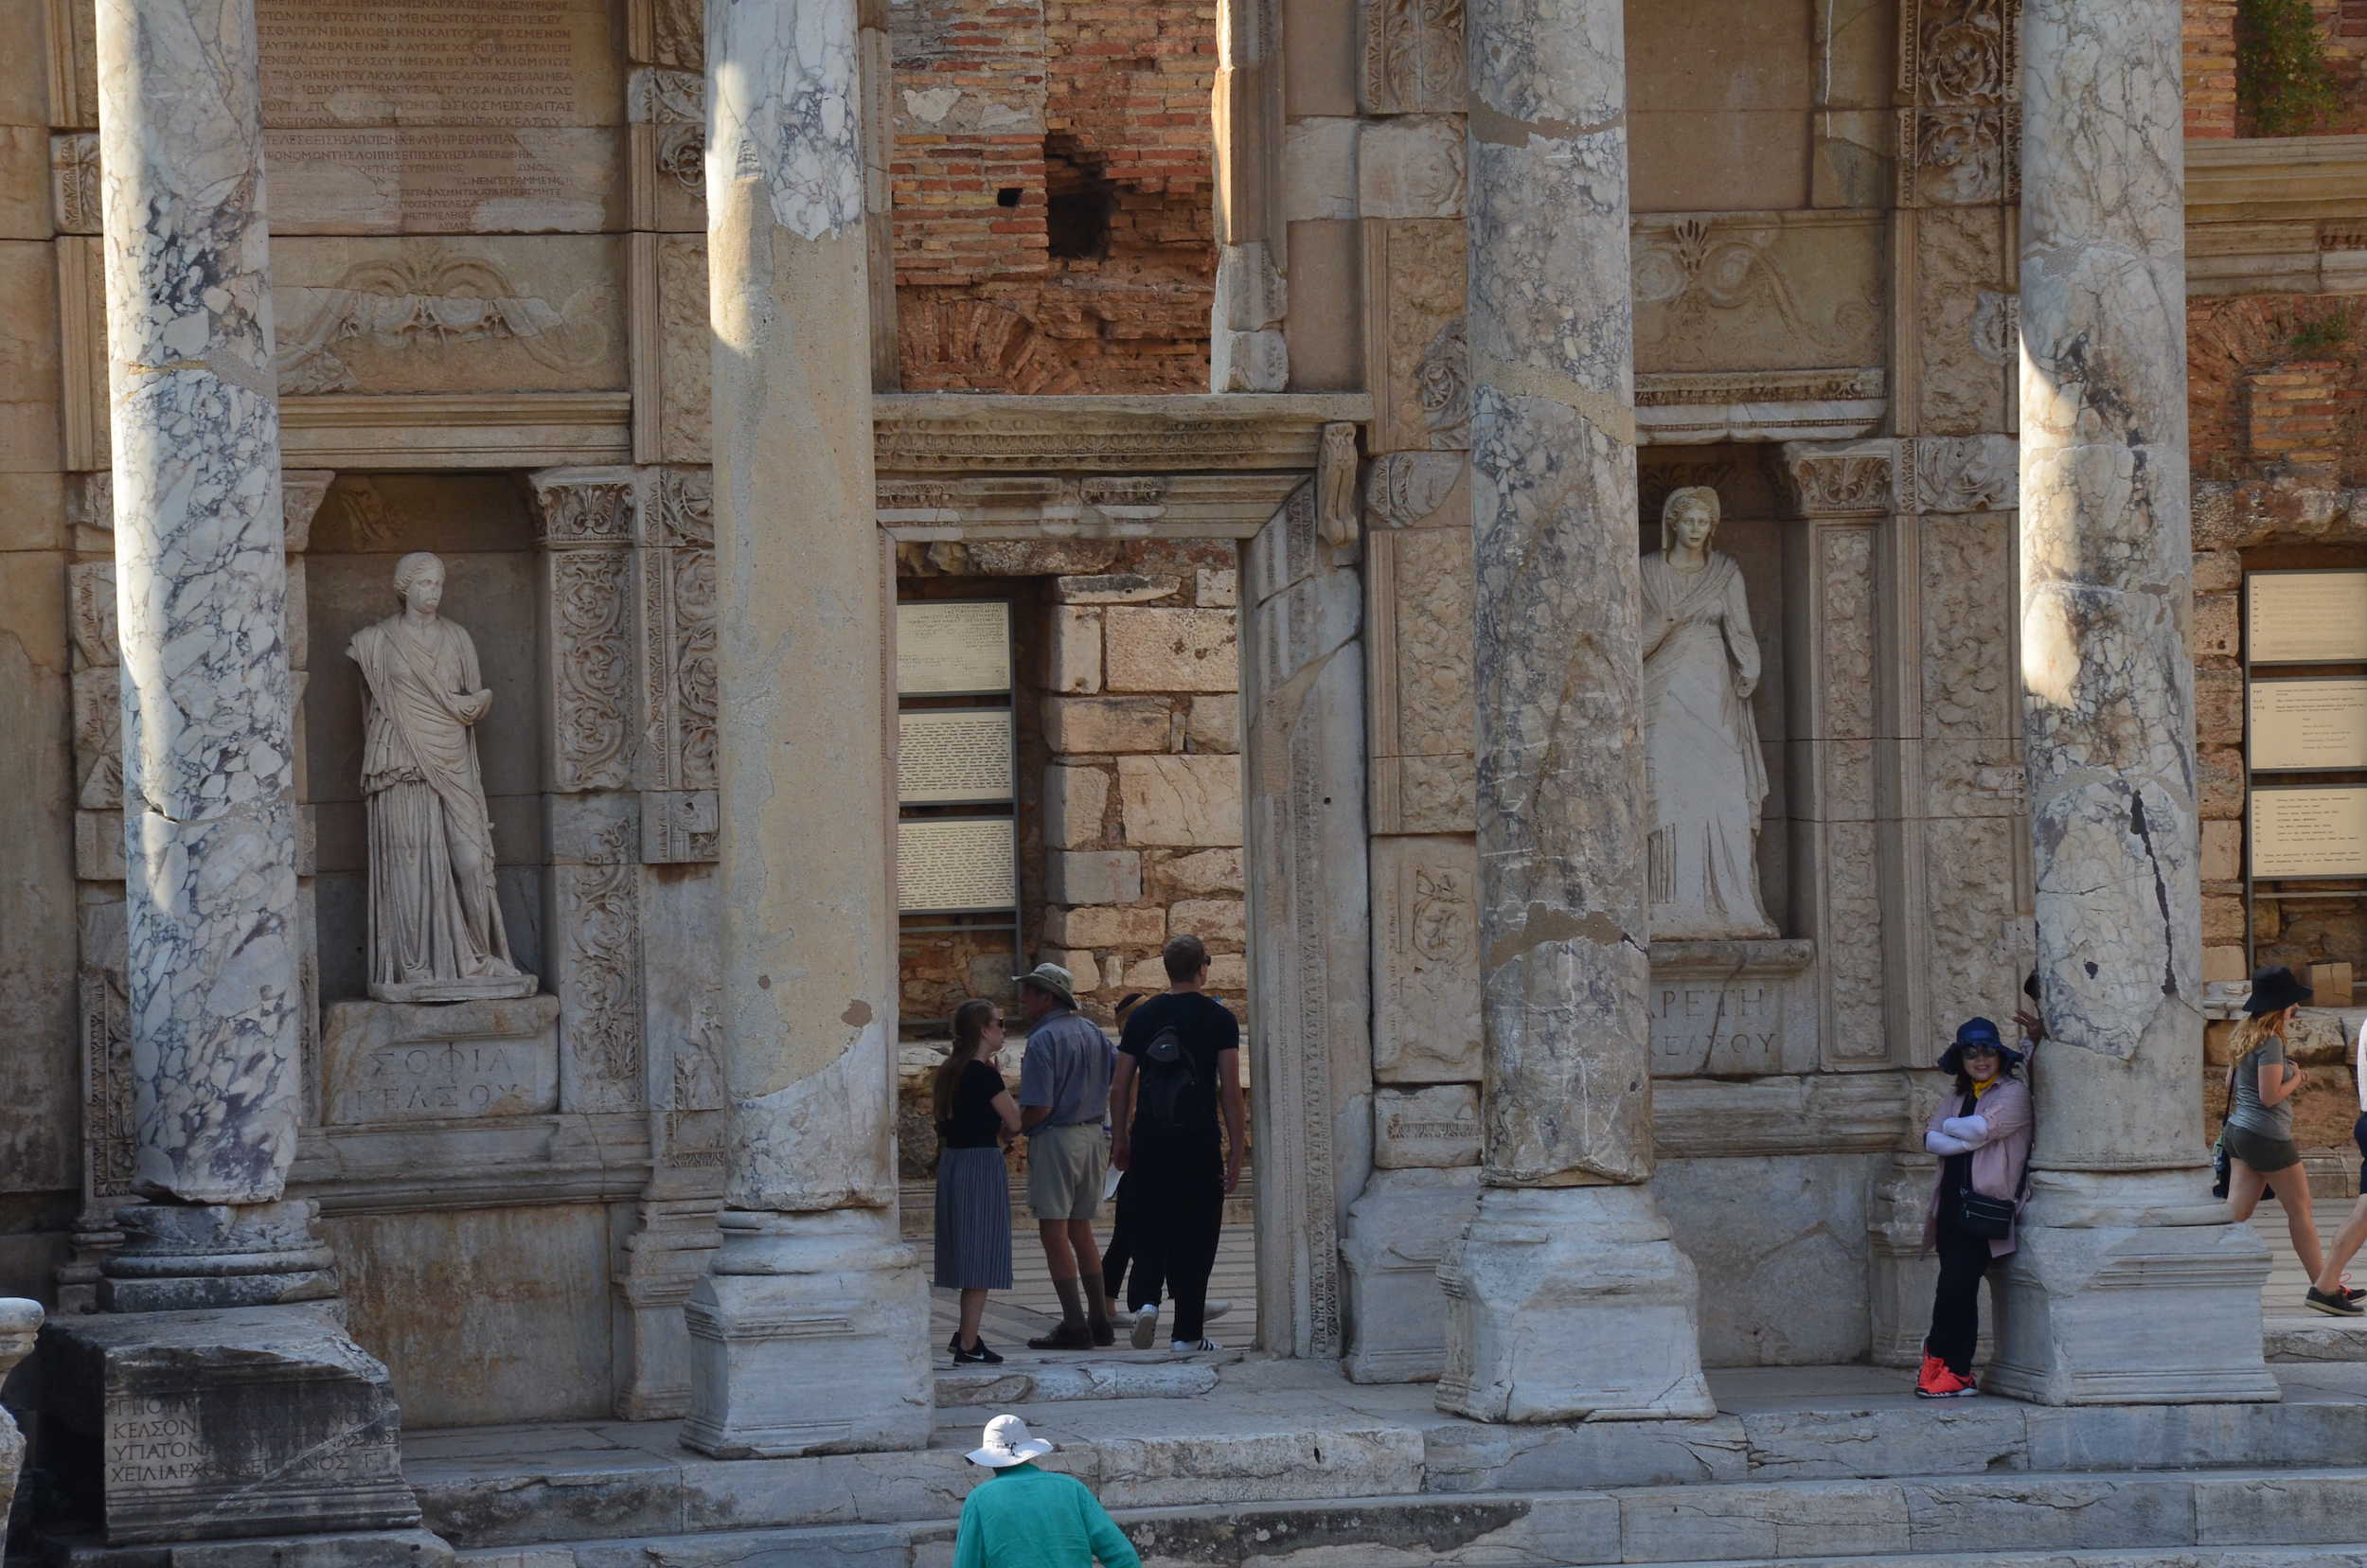 Columns and statues of the Library of Celsus